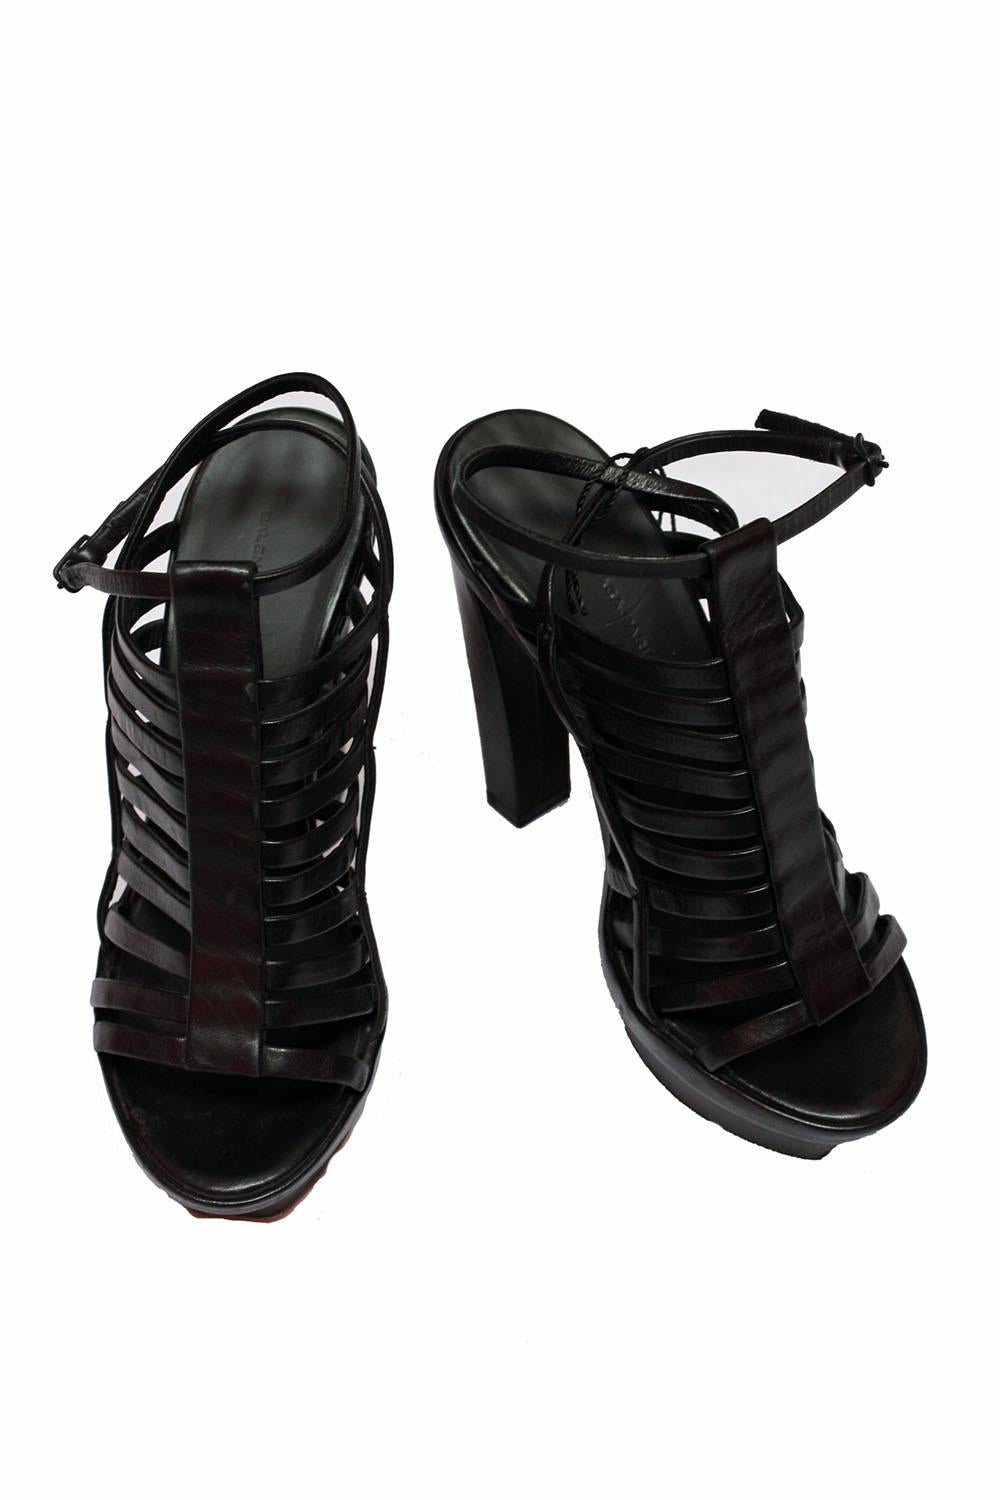 Balenciaga Leather Black Strappy Platforms Size 36 
Platform with block heel 
Sling back, open toe, strappy 
Super cute and sexy - Can be worn all year round 
